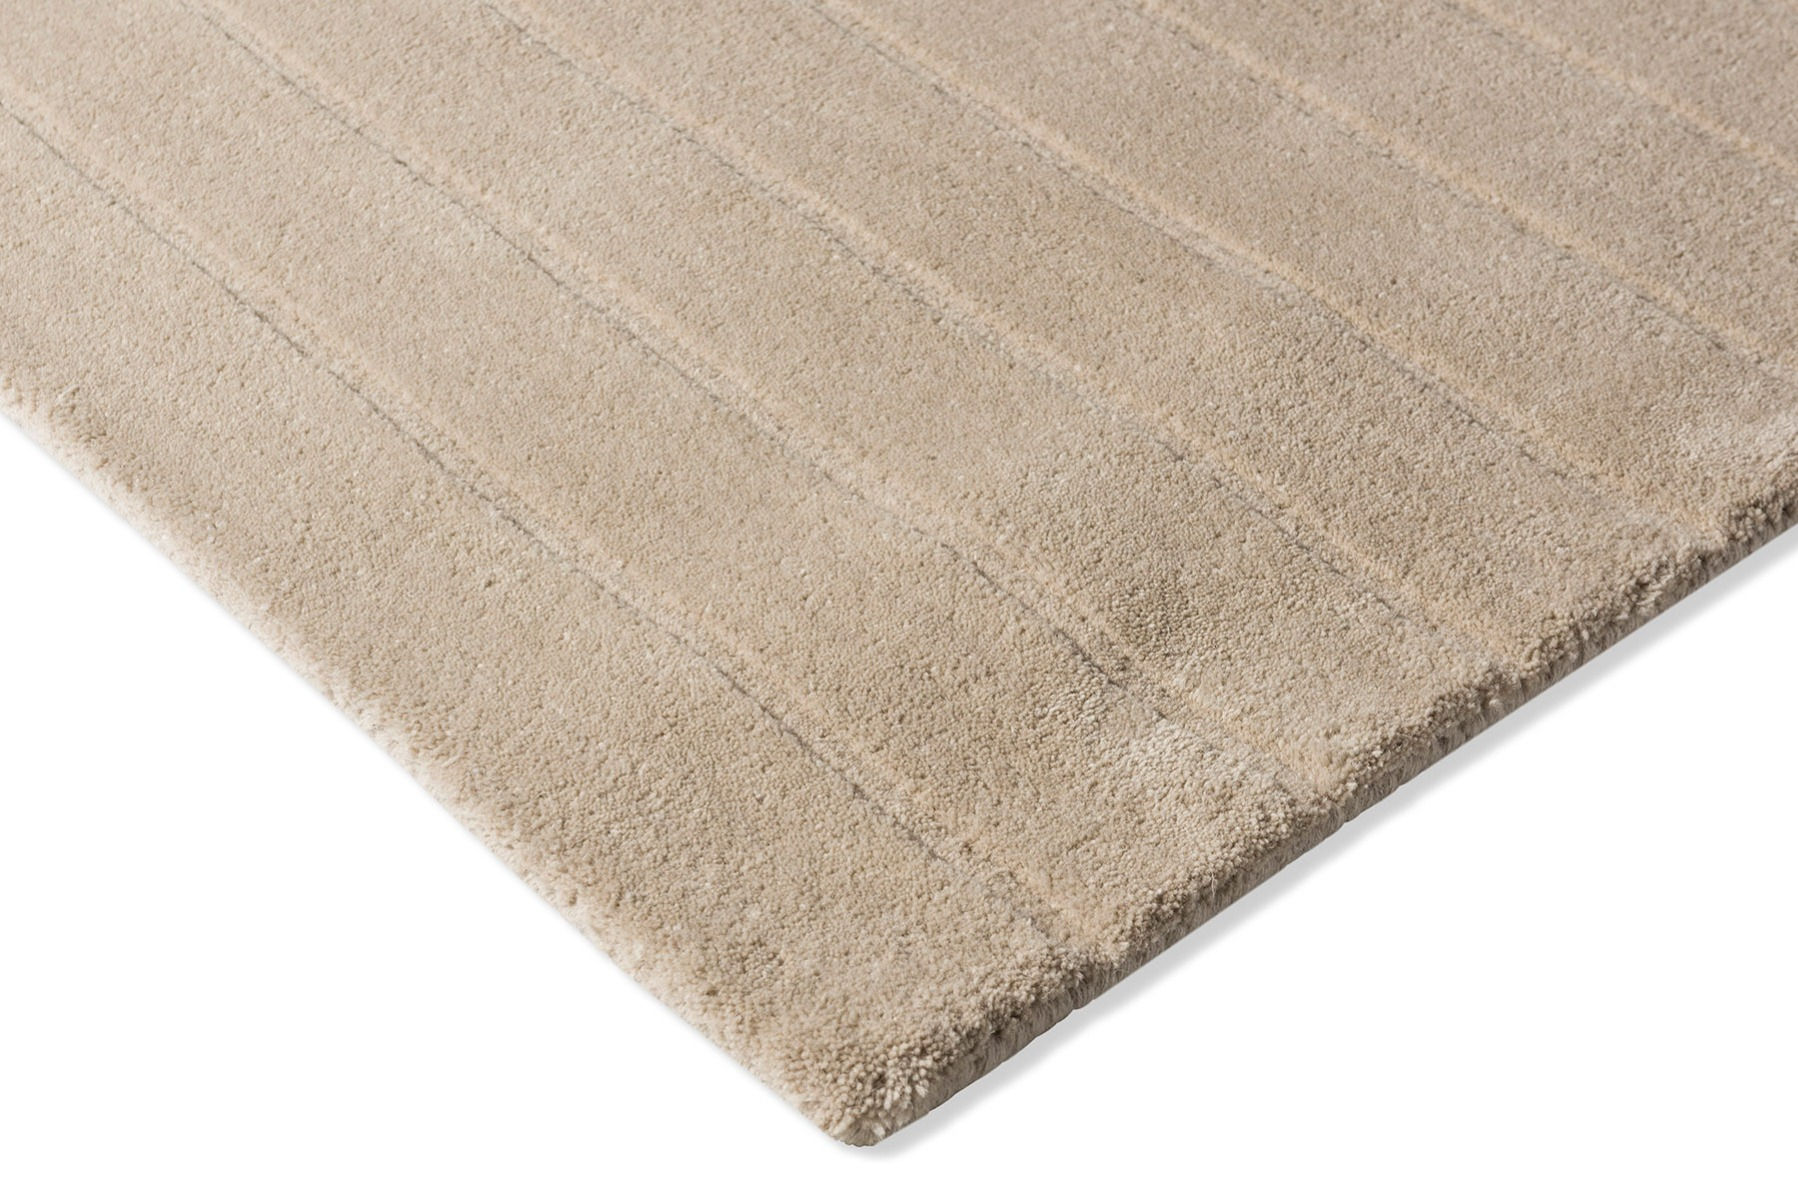 Decor Dune Oyster Handwoven Rug ☞ Size: 8' 2" x 11' 6" (250 x 350 cm)